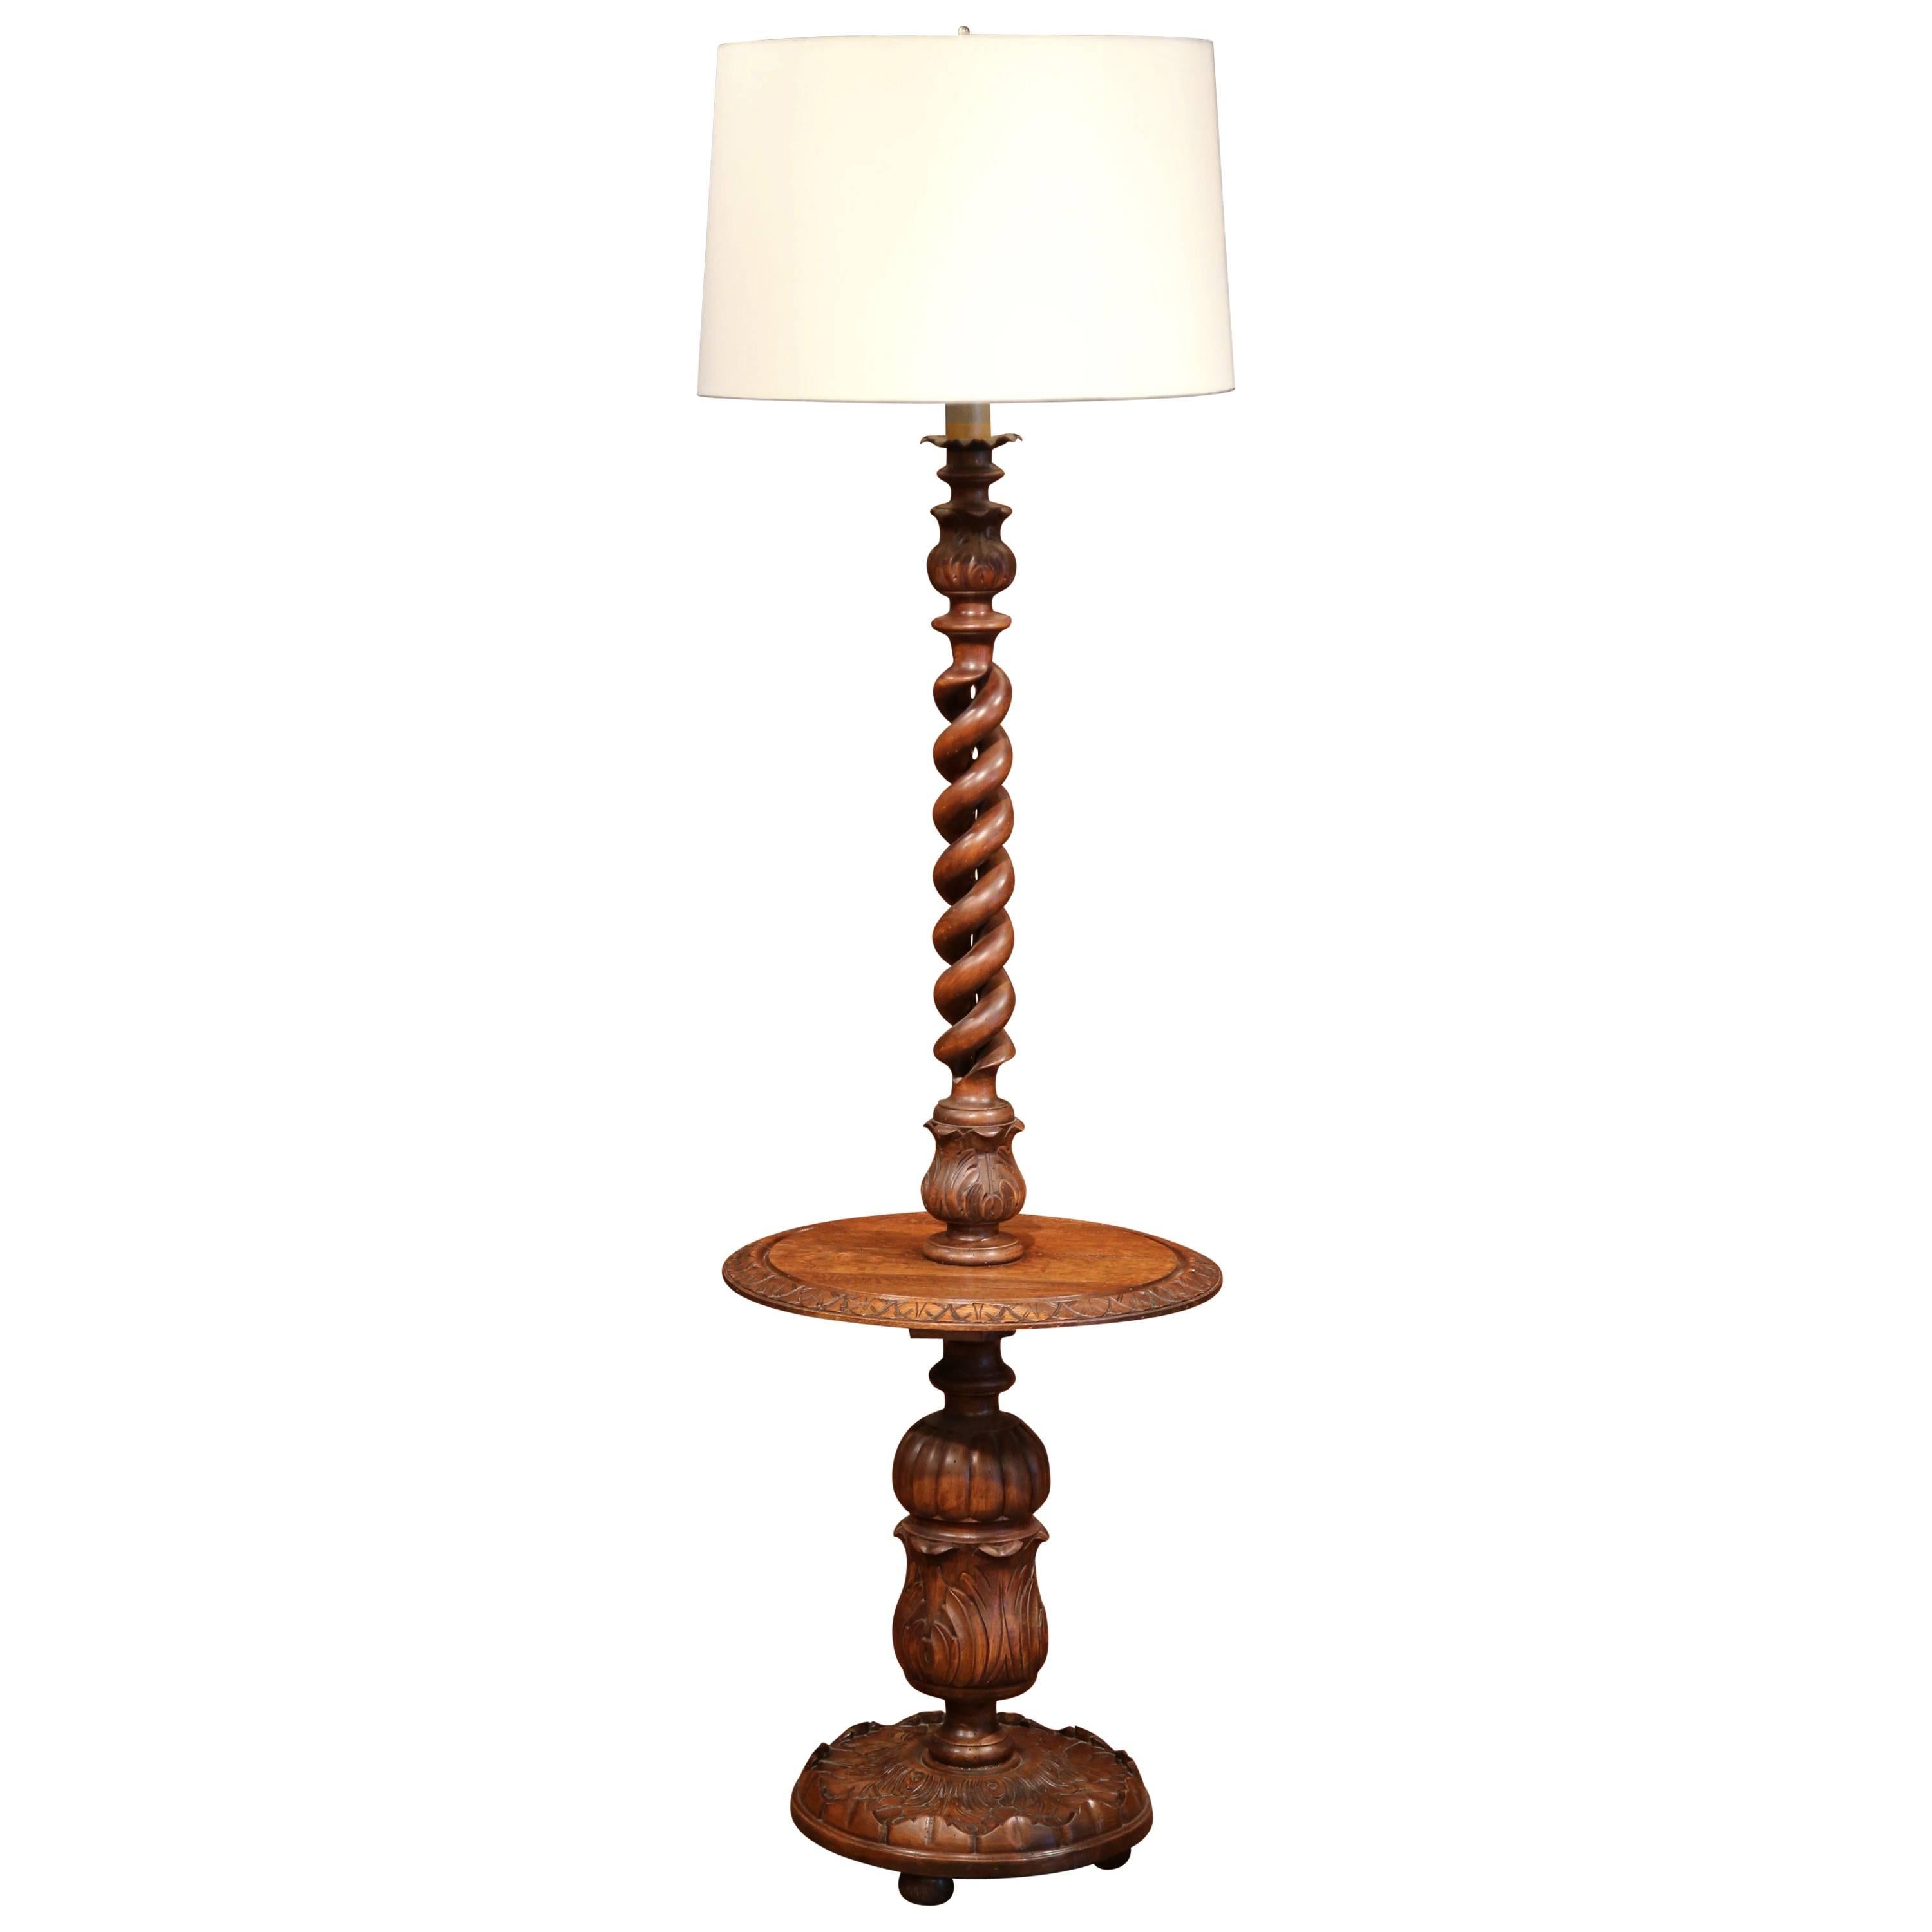 Early 20th Century French Carved and Barley Twist Floor Lamp with Attached Table